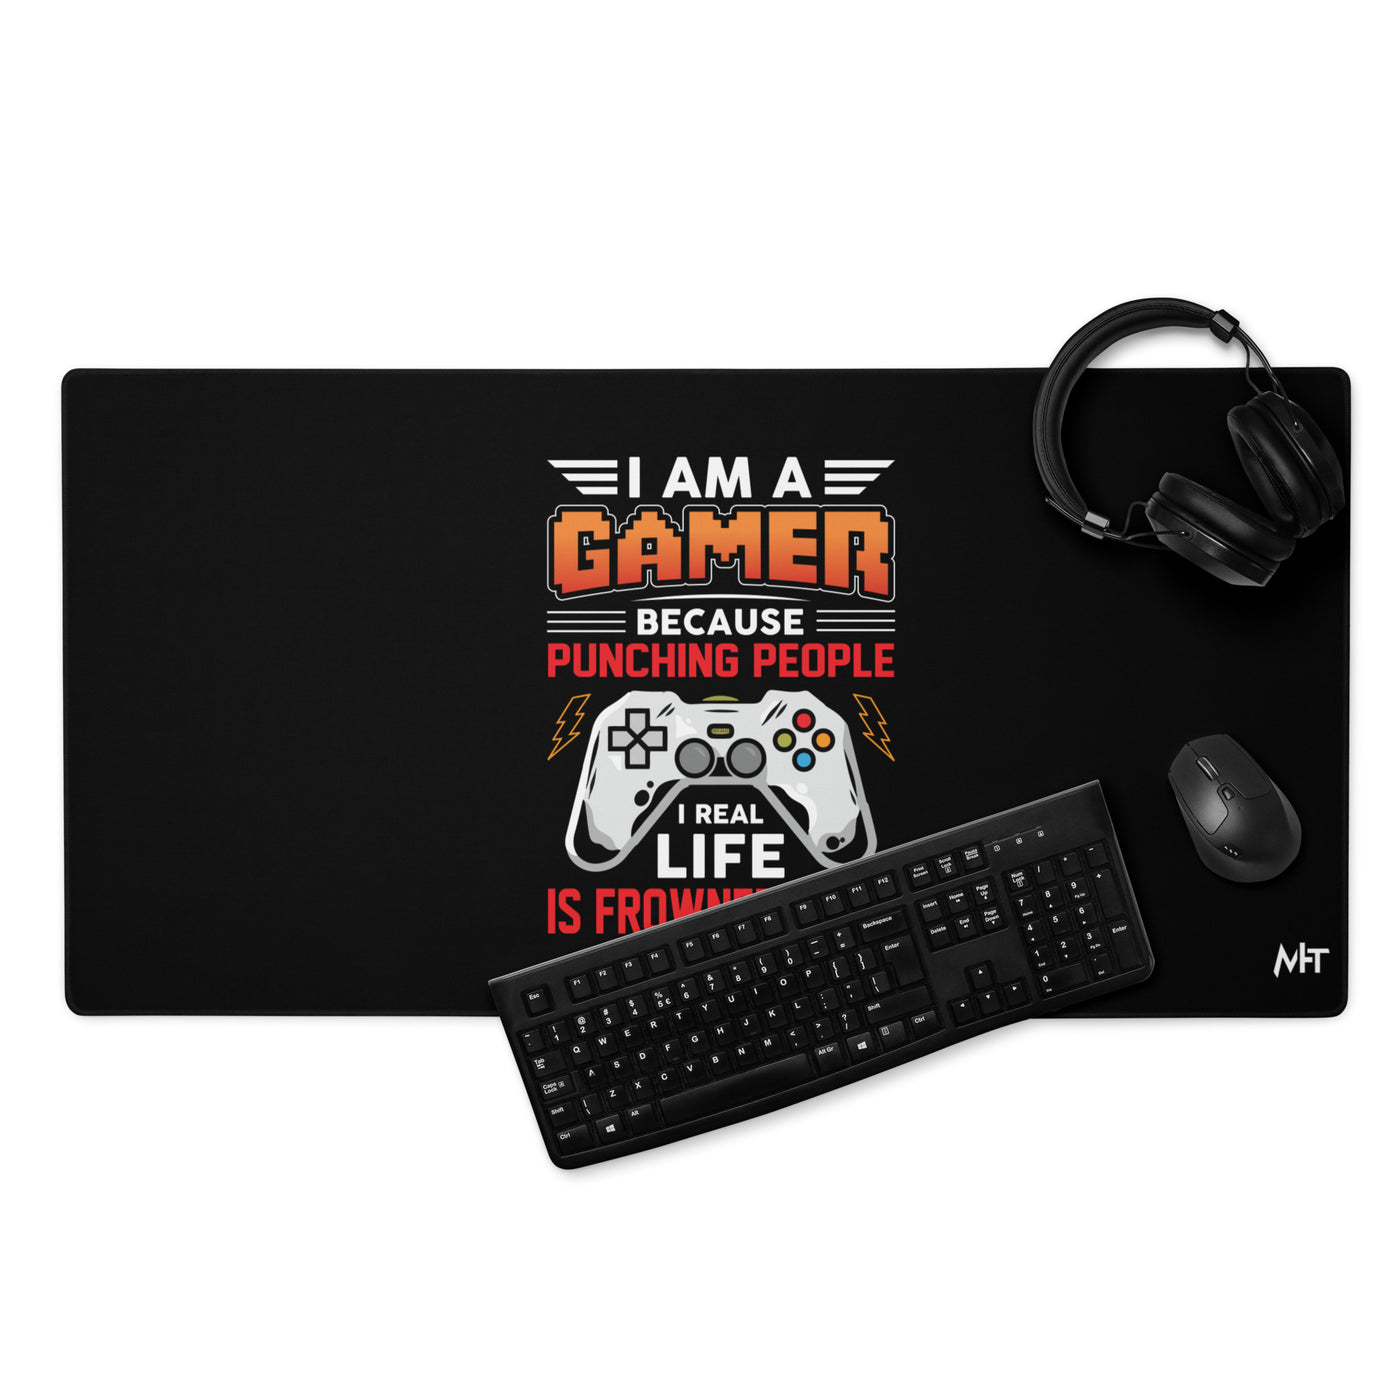 I am a Gamer because Punching people in real life is frowned upon - Desk Mat